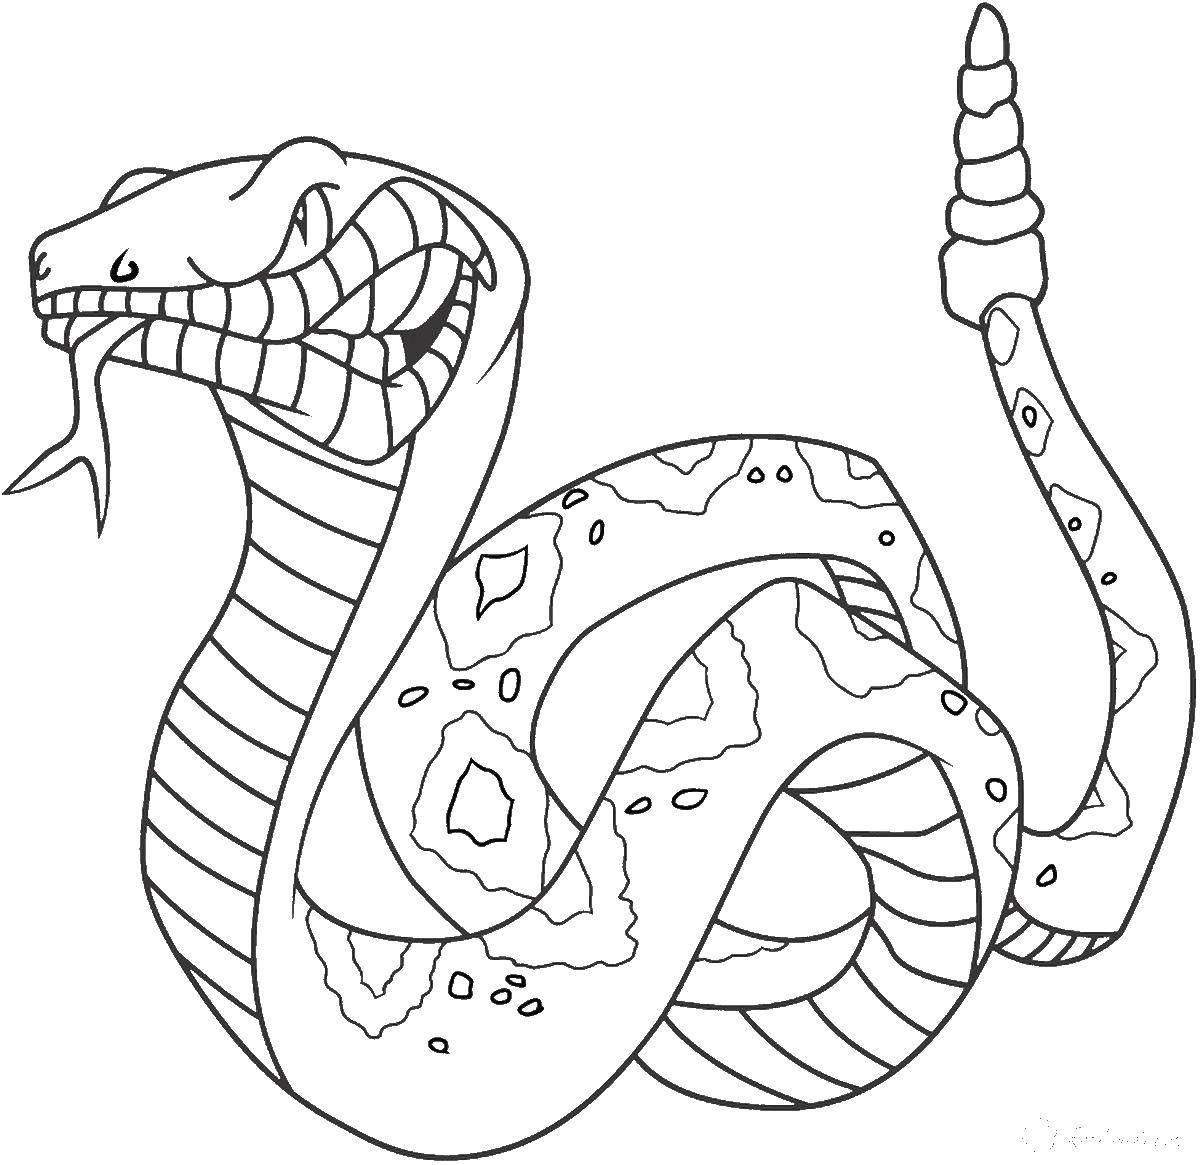 Coloring A big snake. Category reptiles. Tags:  reptile, snake.